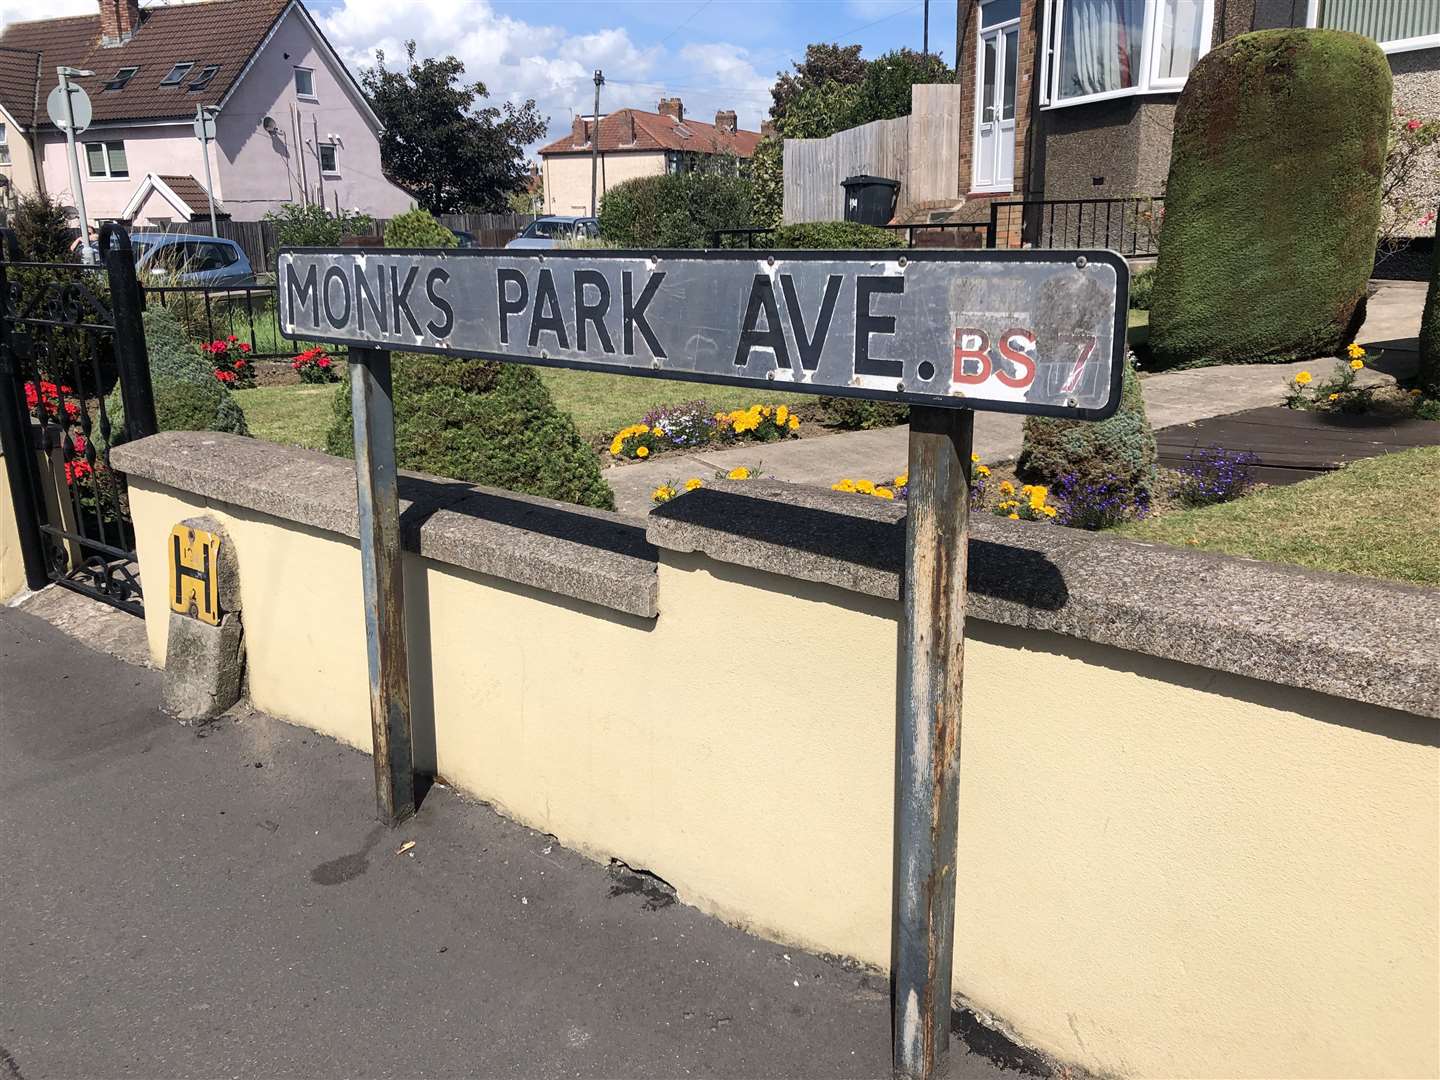 The attack took place in Monks Park Avenue in Bristol (Claire Hayhurst/PA)